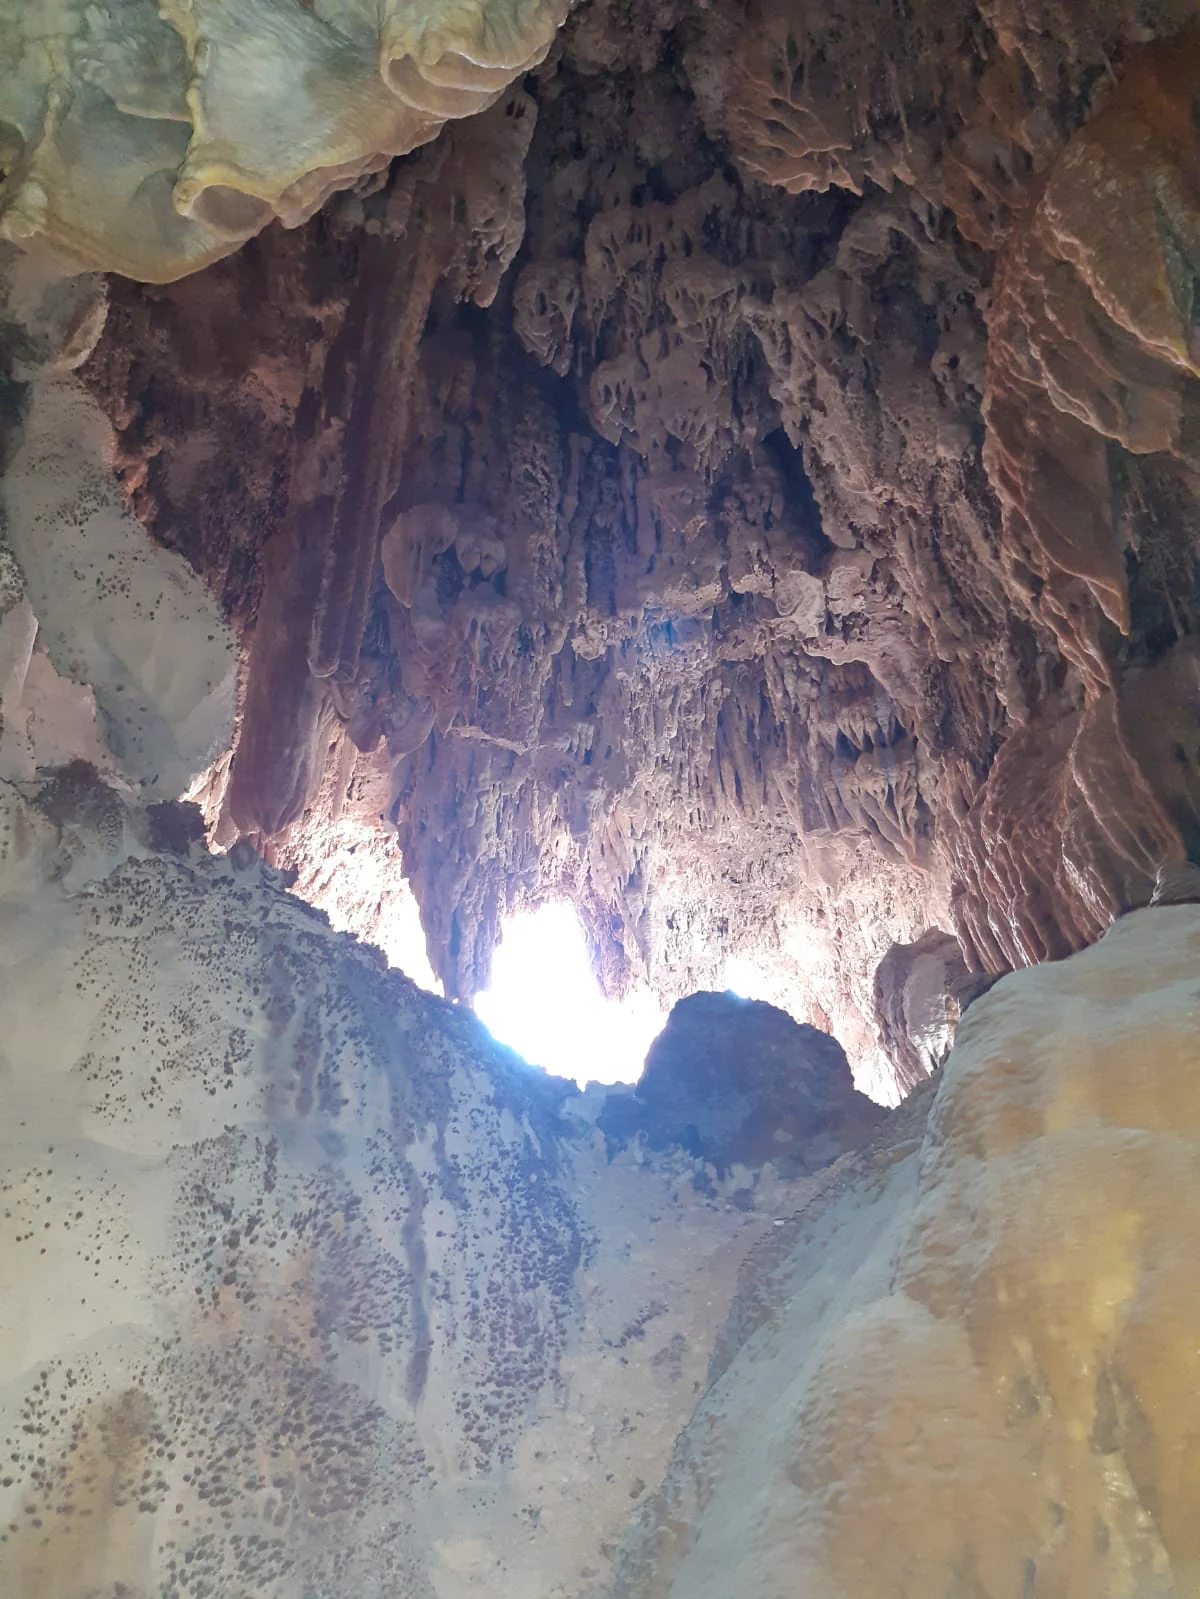 Imagen secundaria 2 - This is the spectacular cave discovered during construction works in the centre of Torremolinos